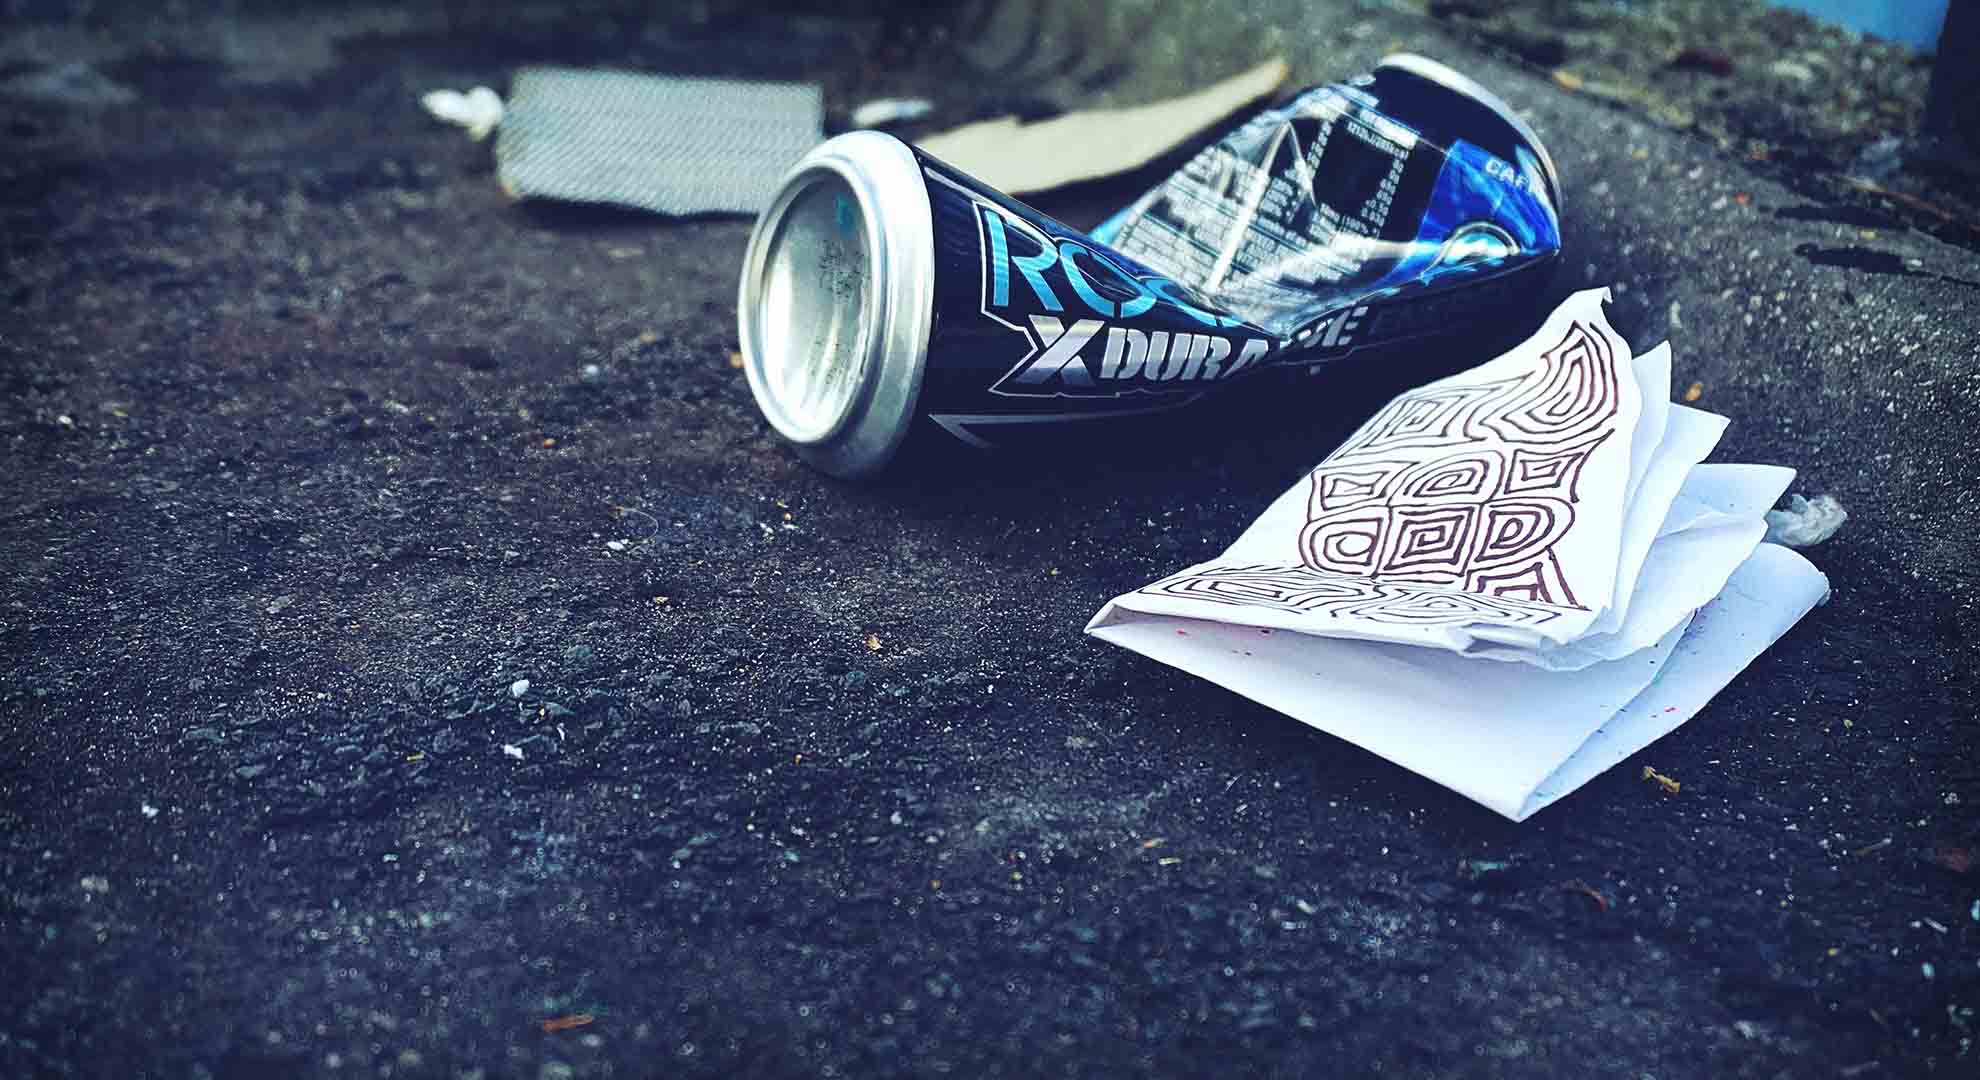 image of can and napkin littered on the street